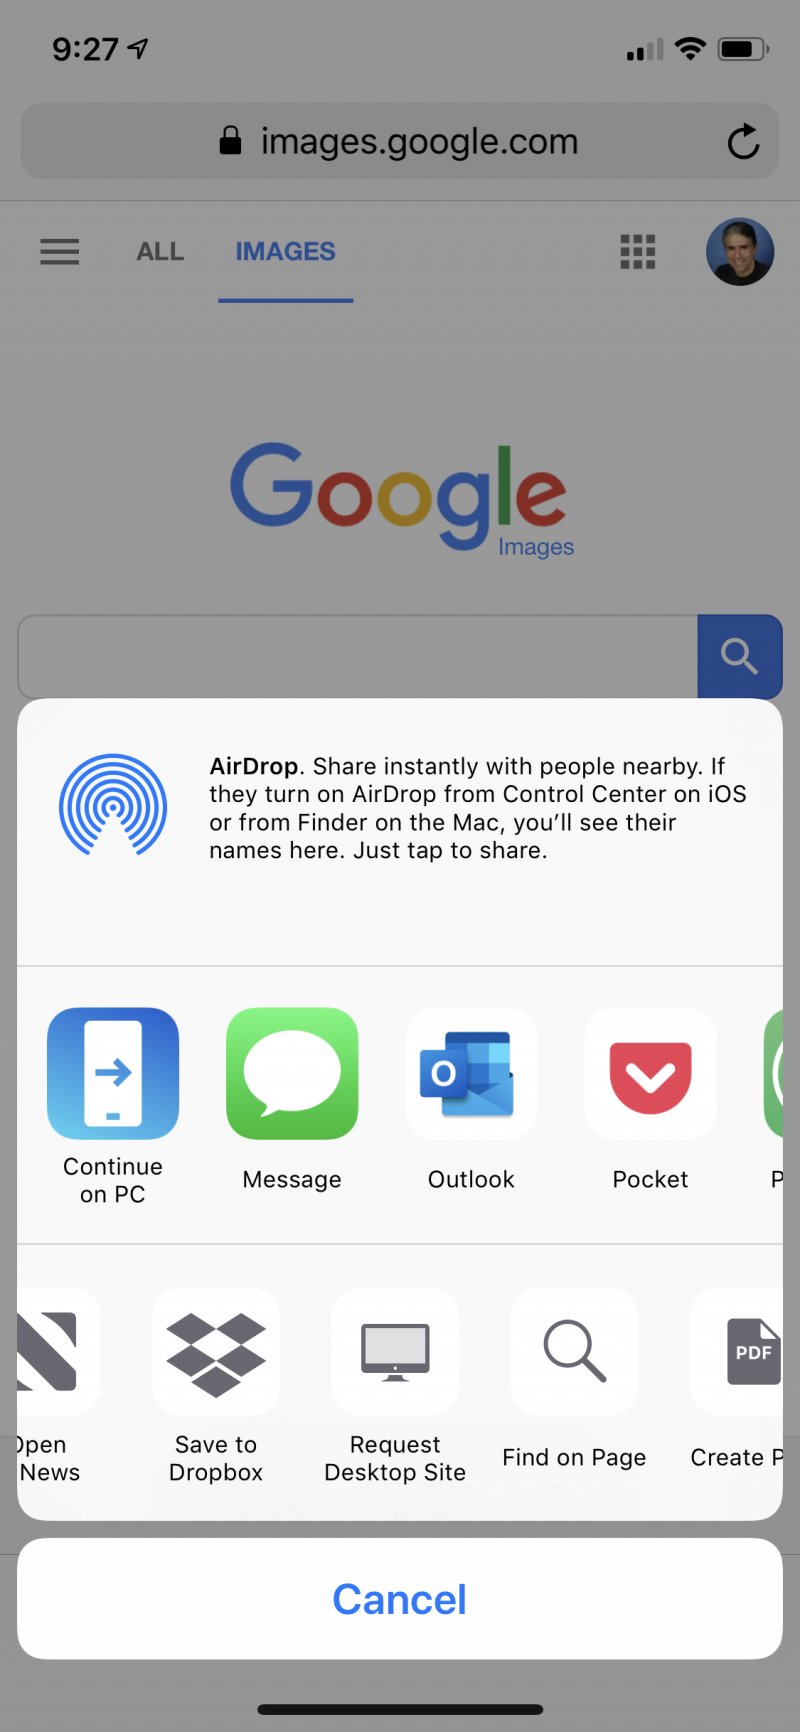 How To Reverse Image Search On An Iphone And Why You Might Want To Use These Third Party Apps Instead Of Google Images